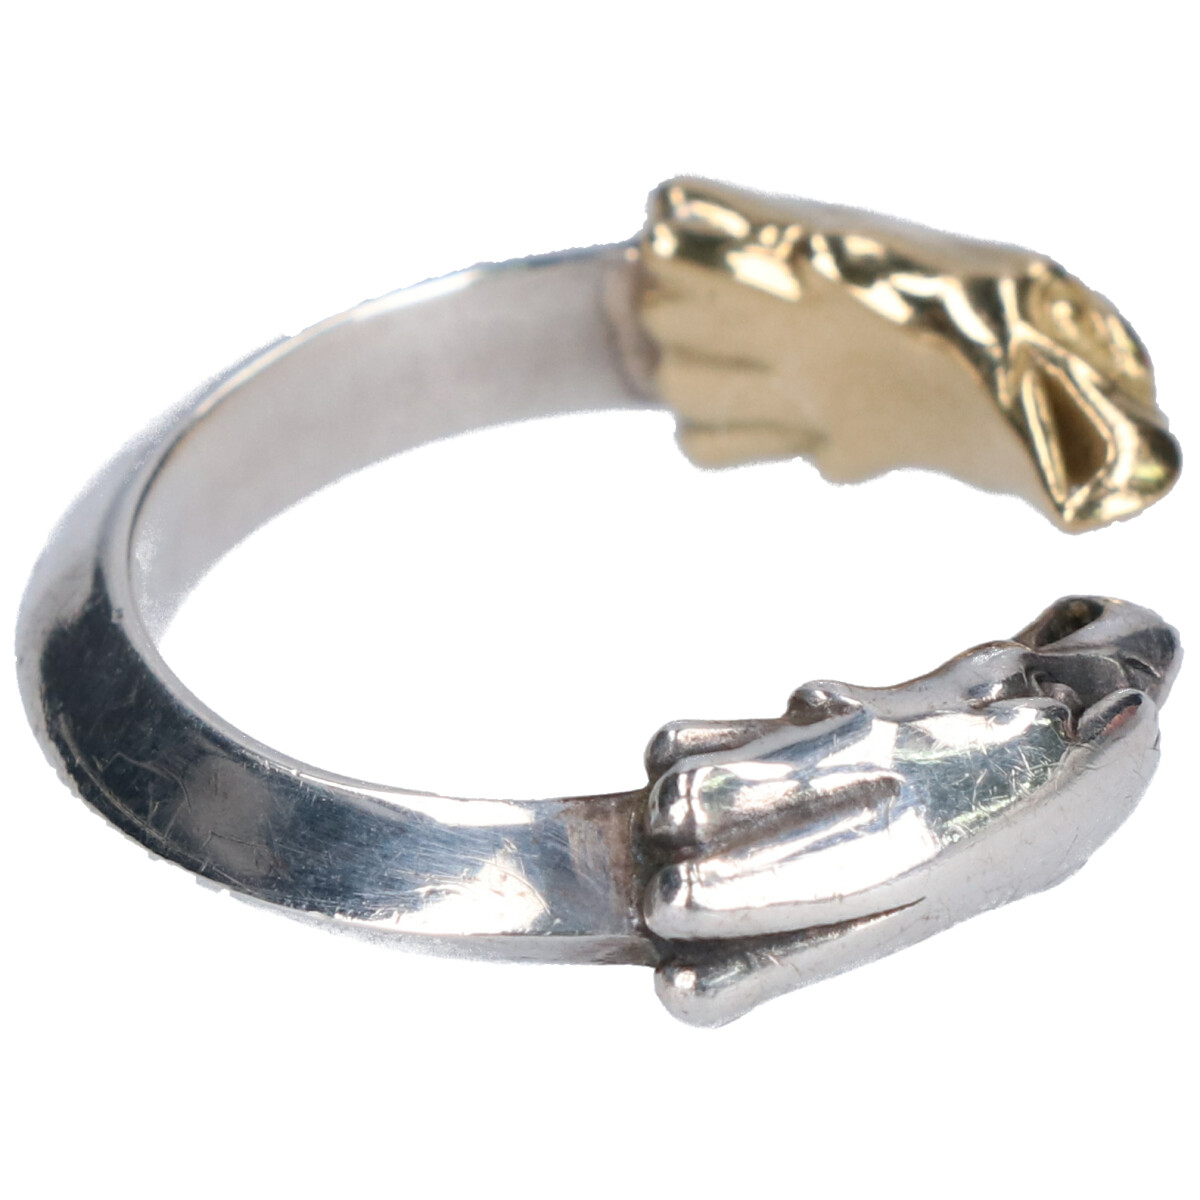 5％OFF】 LARRY SMITH DOUBLE EAGLE HEAD RING リング